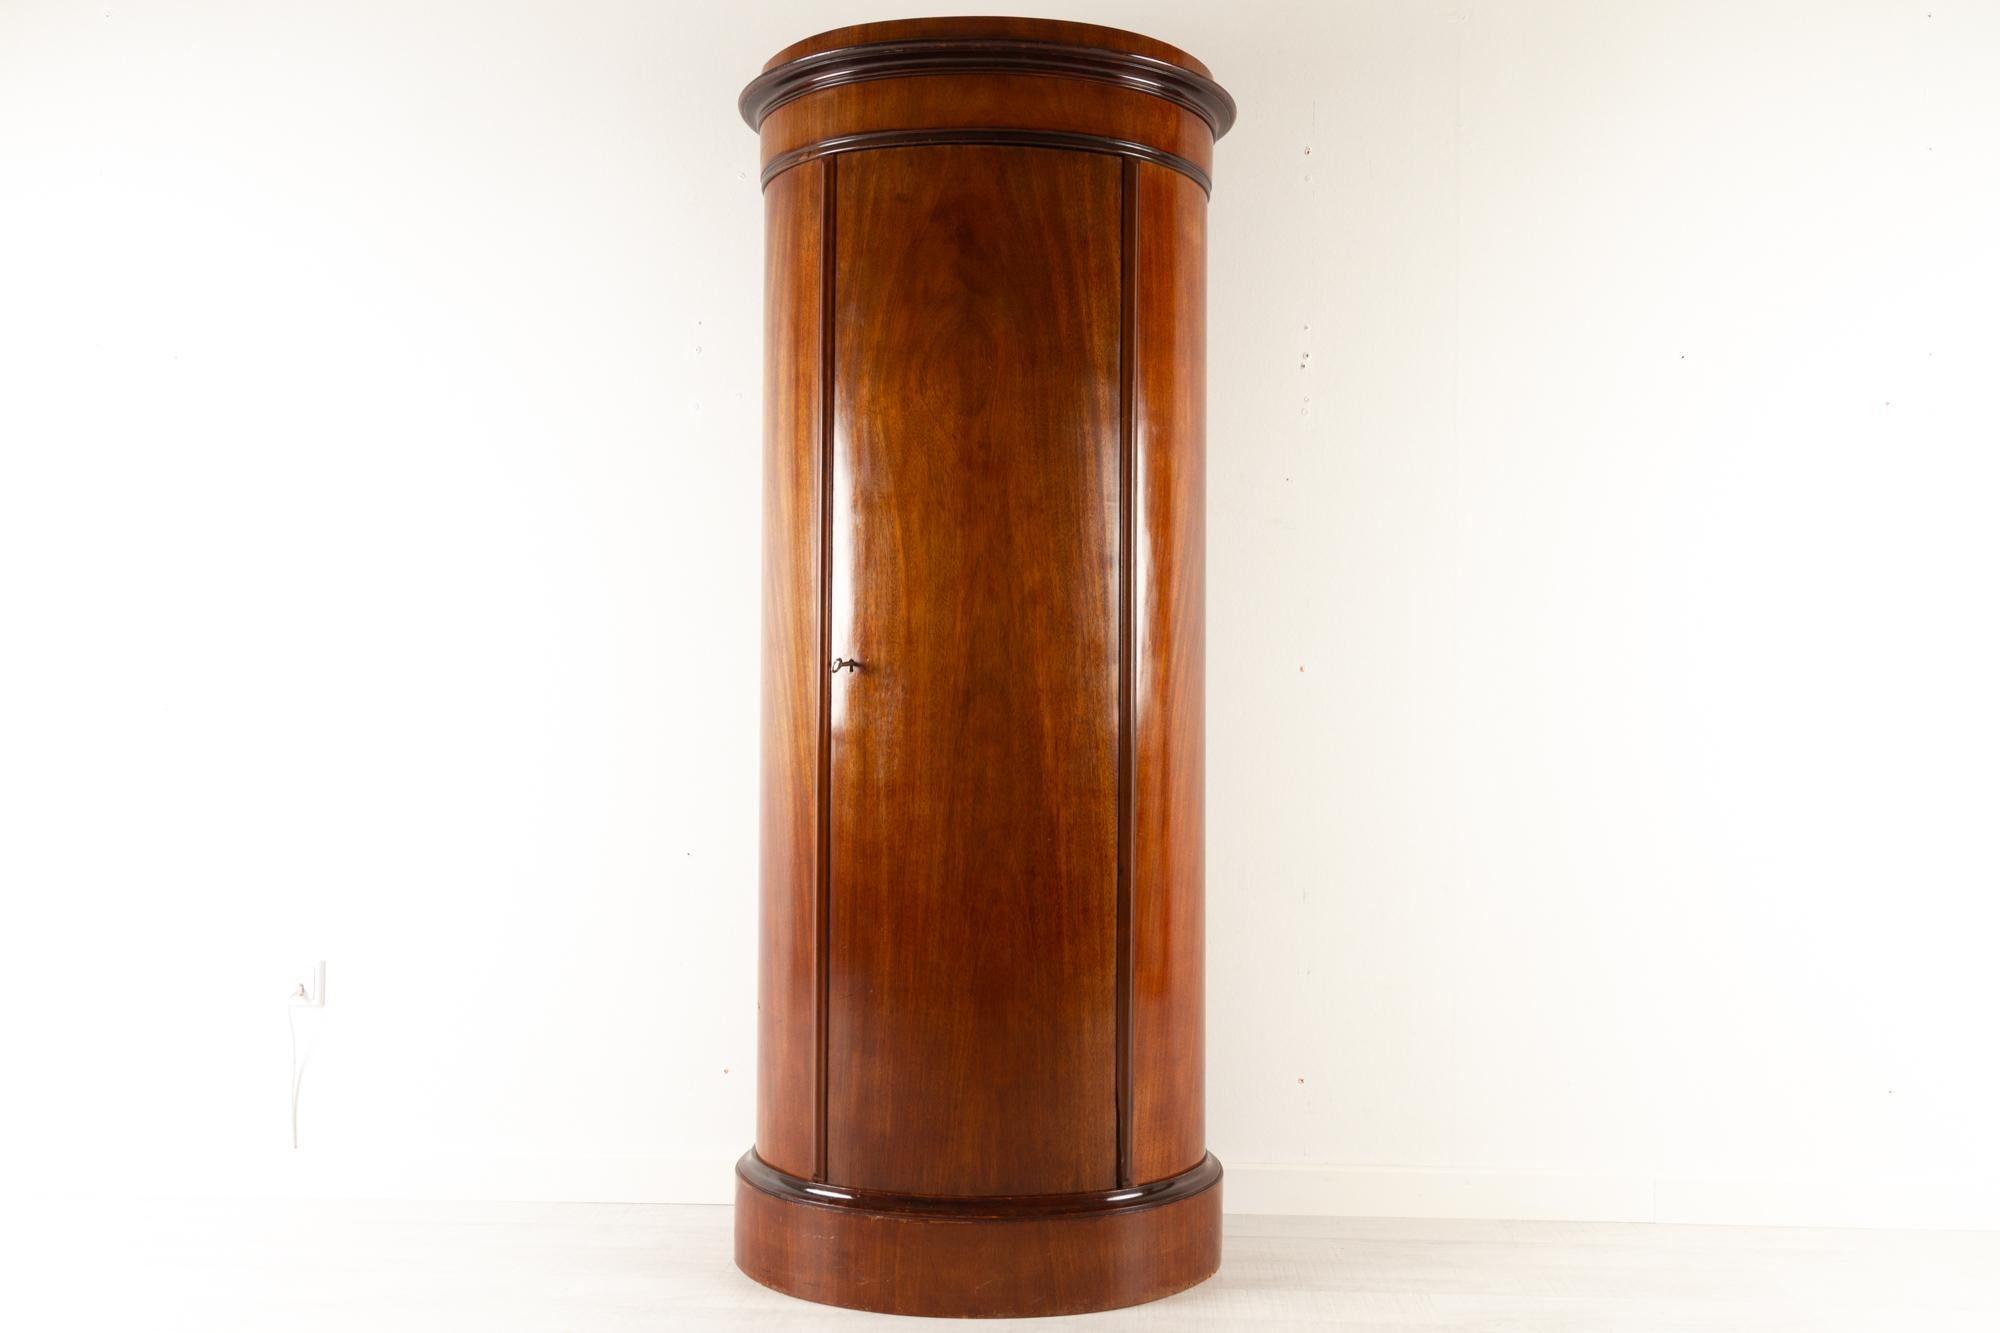 19th Century Biedermeier pedestal cabinet 1850s
Tall Danish oval cabinet from the Biedermeier/late empire period. Four fixed oak shelves behind the curved door. Door has a lock and key. Serves a dual purpose, both a cabinet and a pedestal for